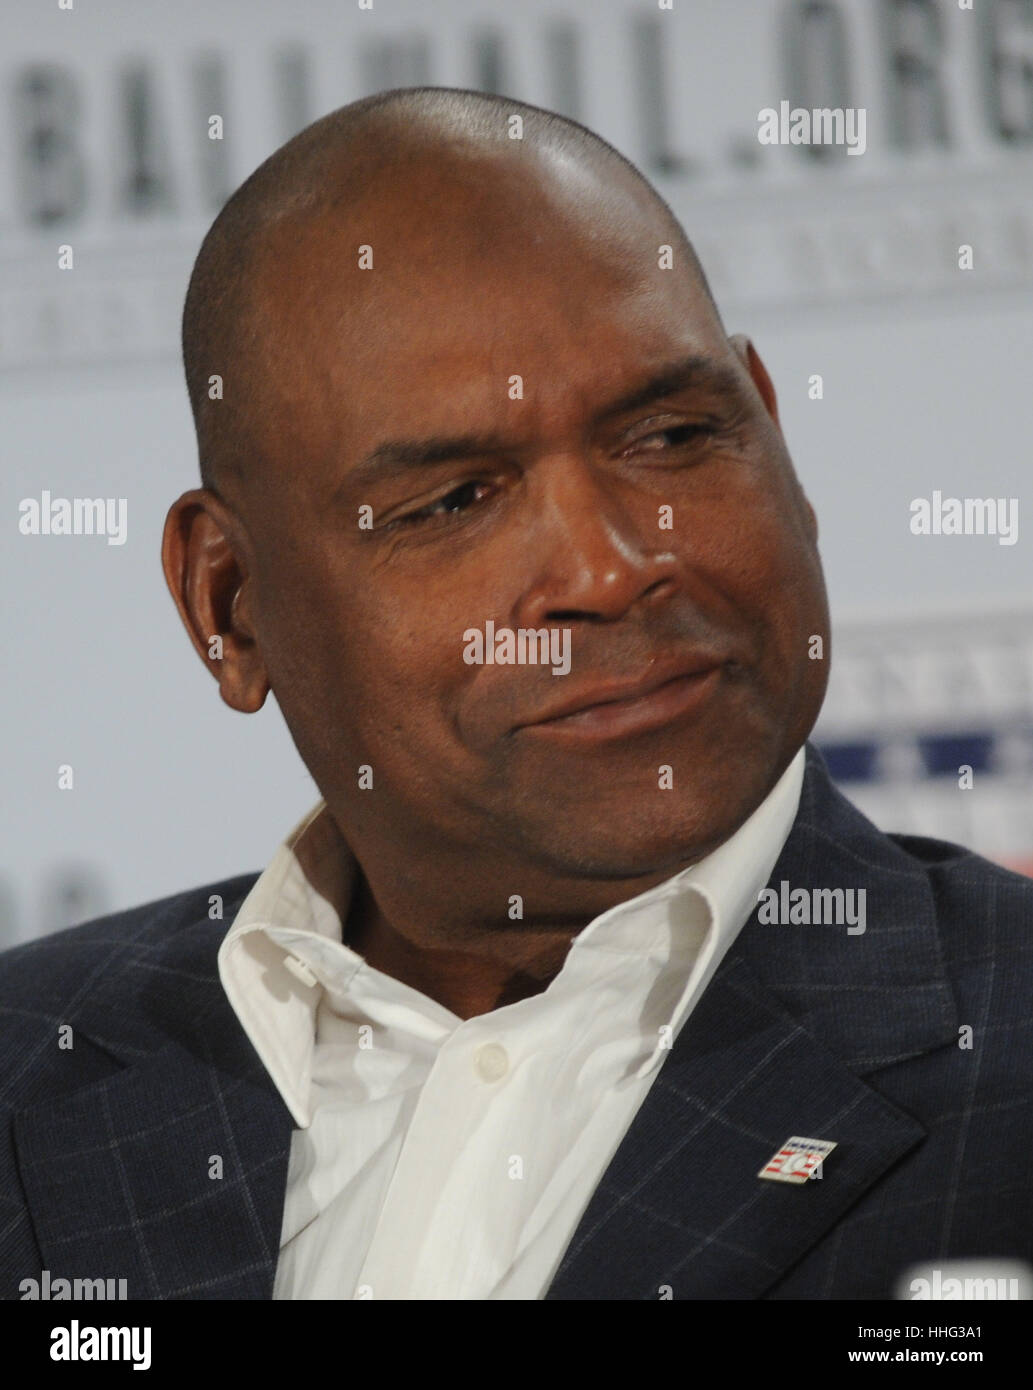 Tim raines hi-res stock photography and images - Alamy